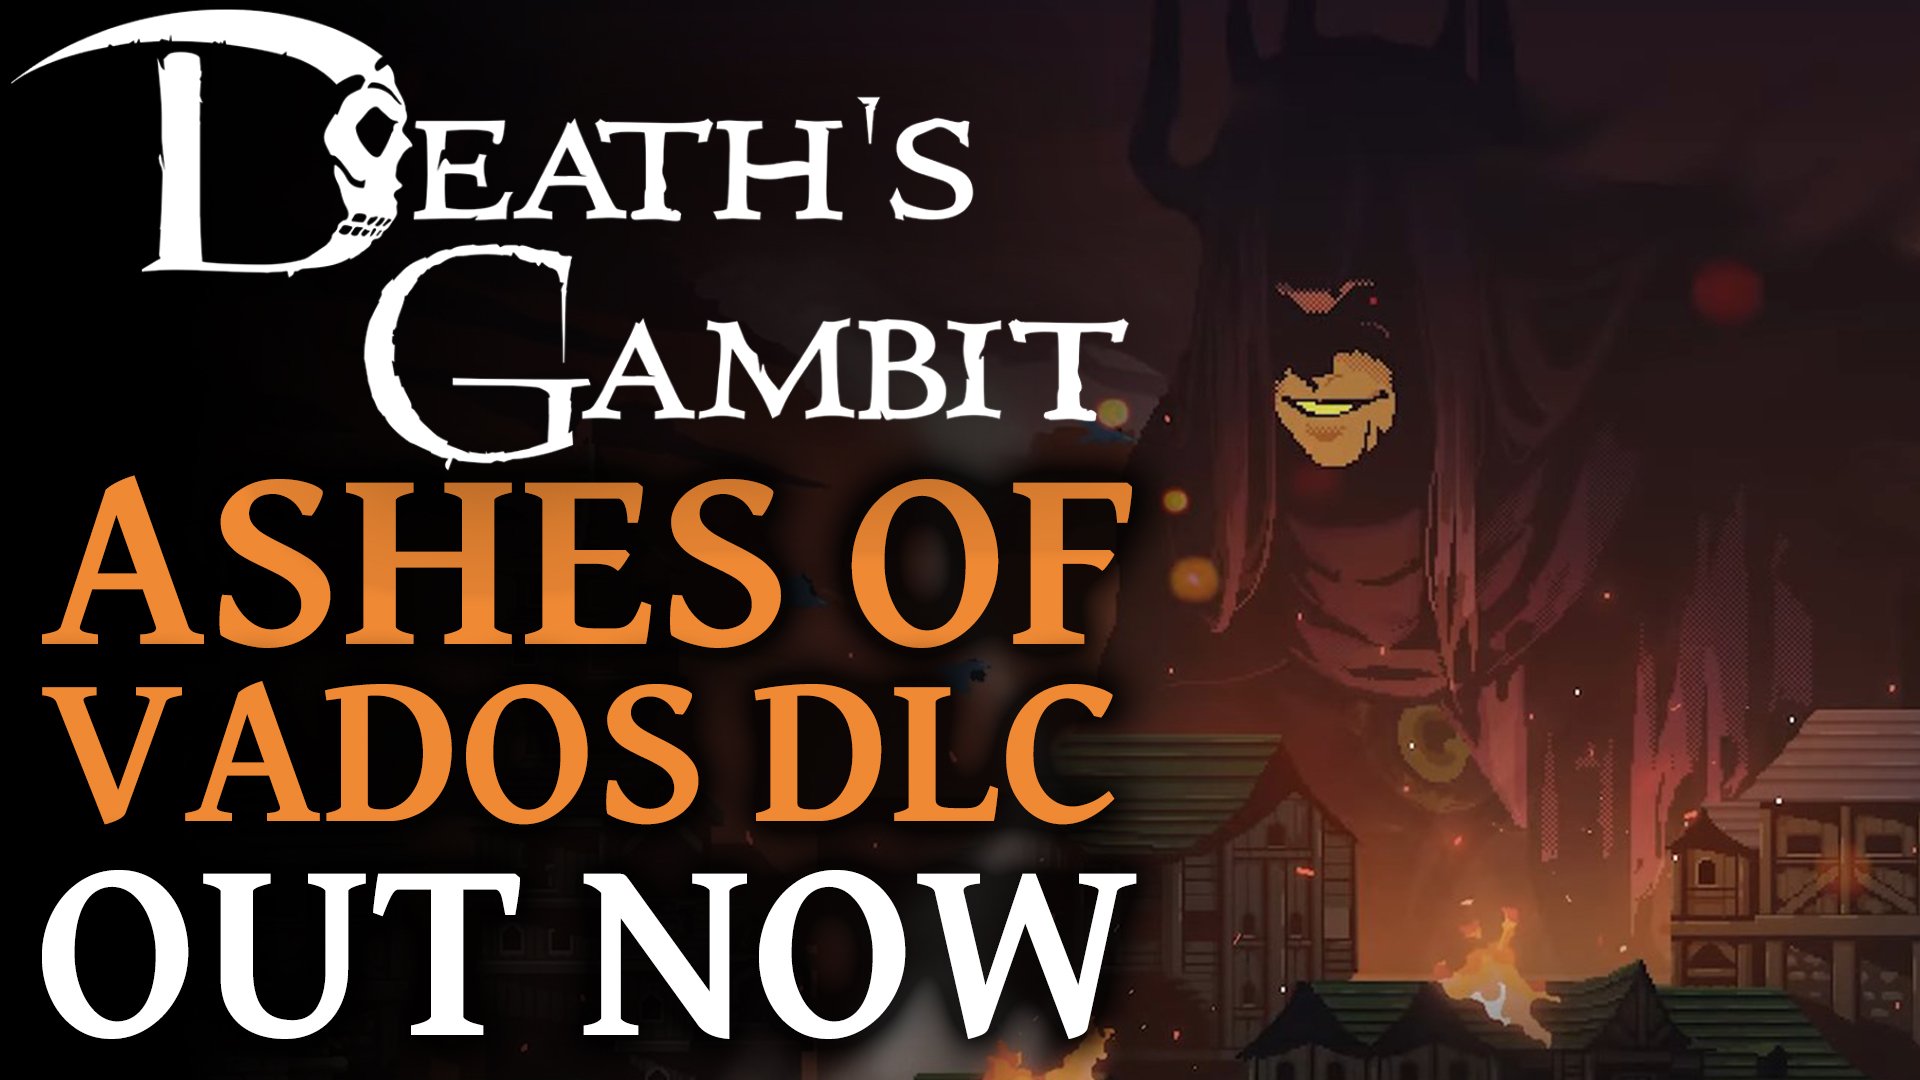 Death's Gambit: Afterlife for PlayStation 4 - Sales, Wiki, Release